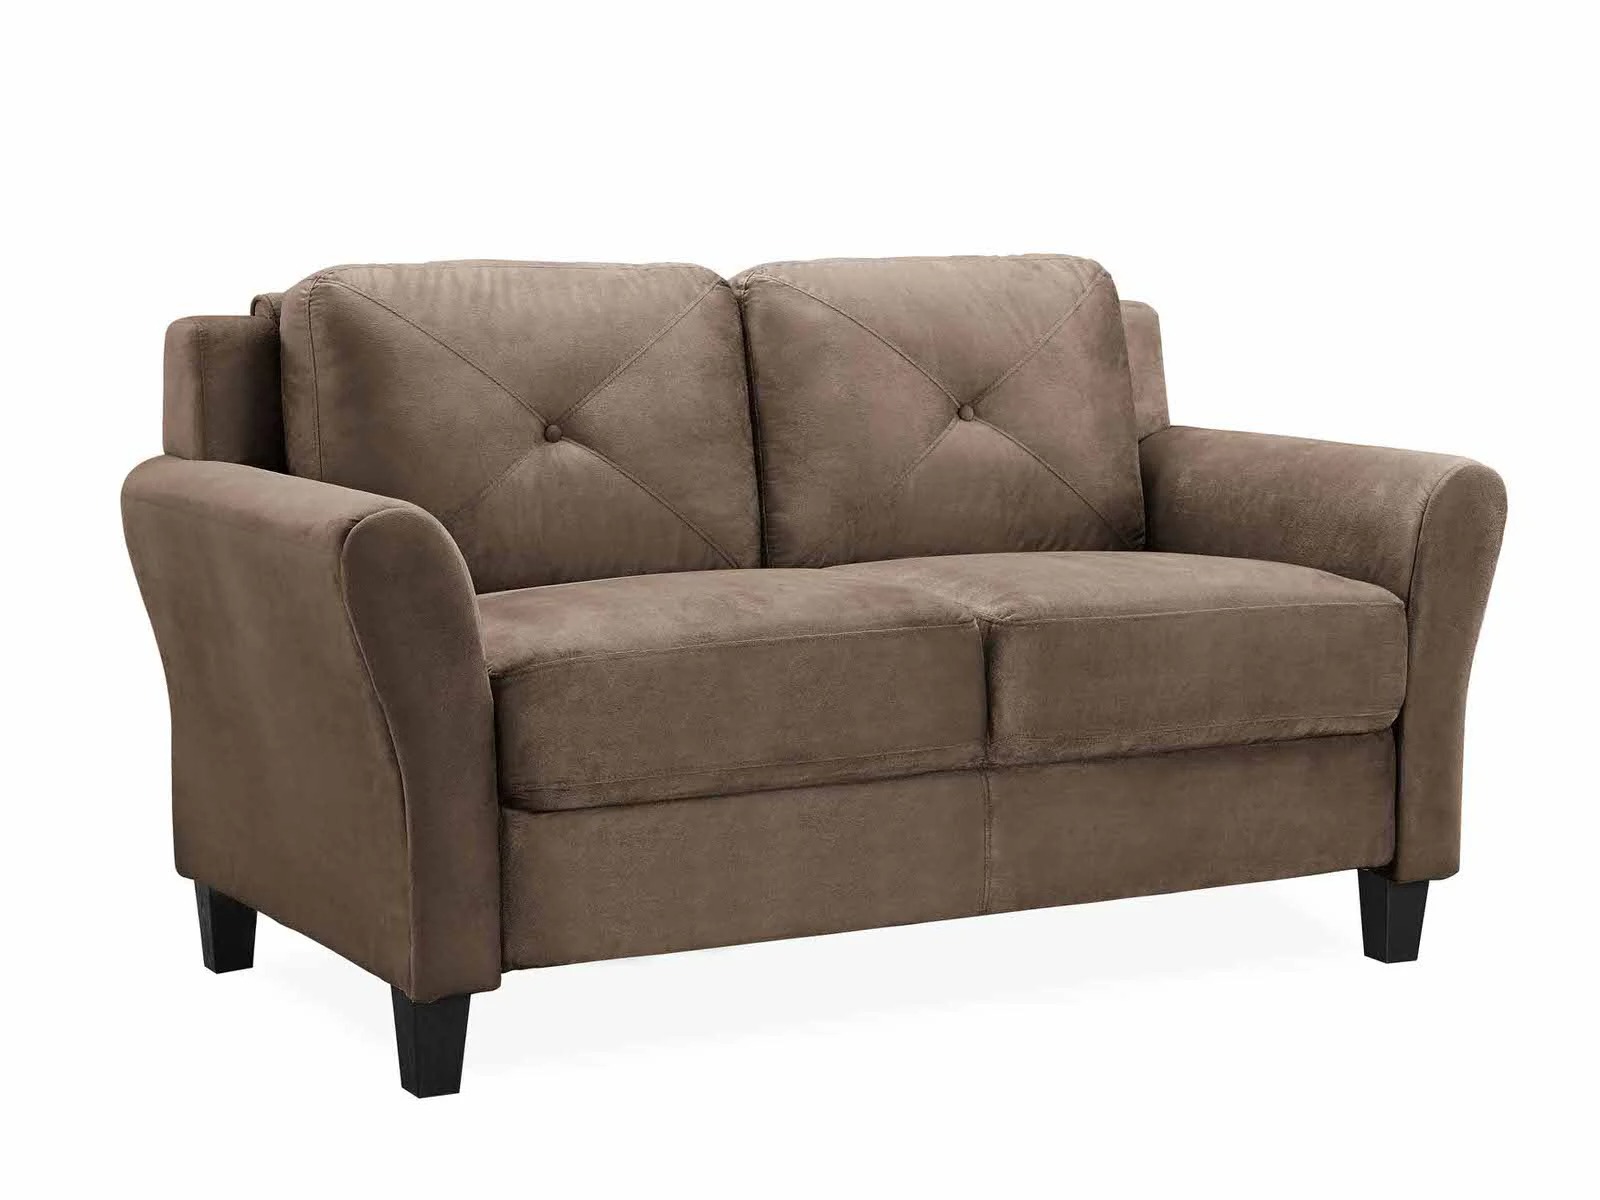 Hartford Microfiber 2 Seat Sofa With Curved Arms-0